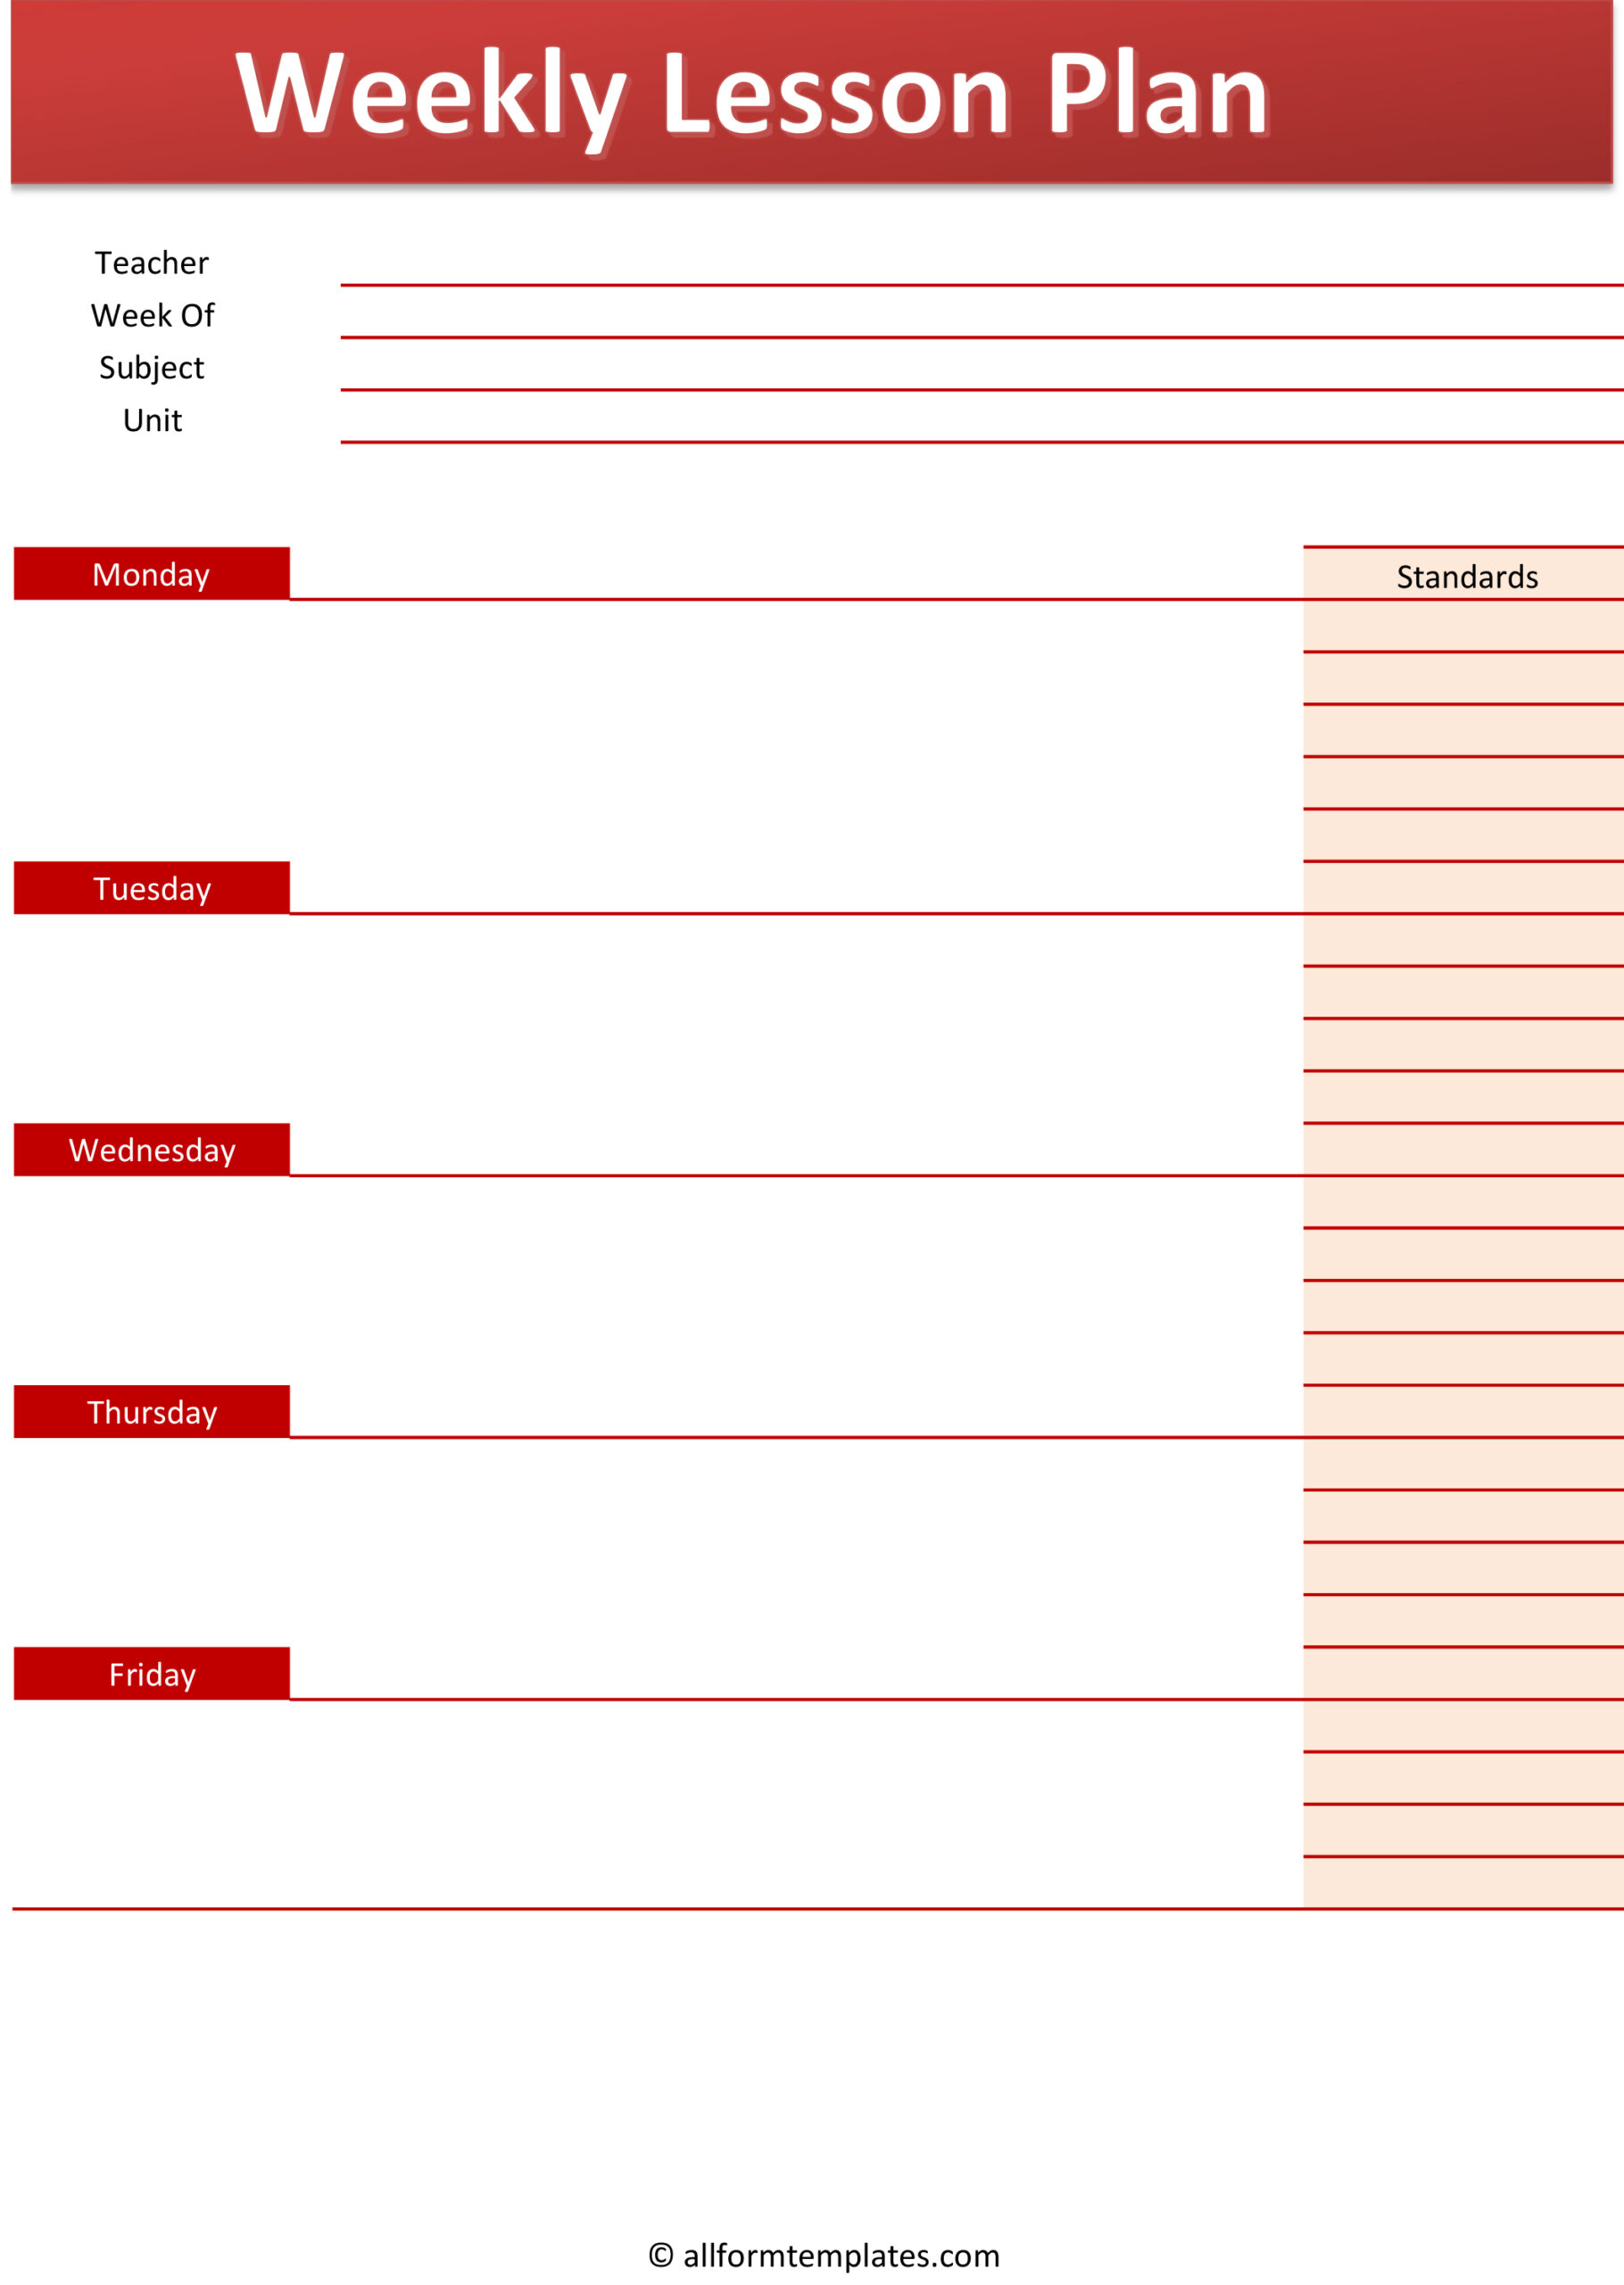 Weekly-Lesson-Template-HD